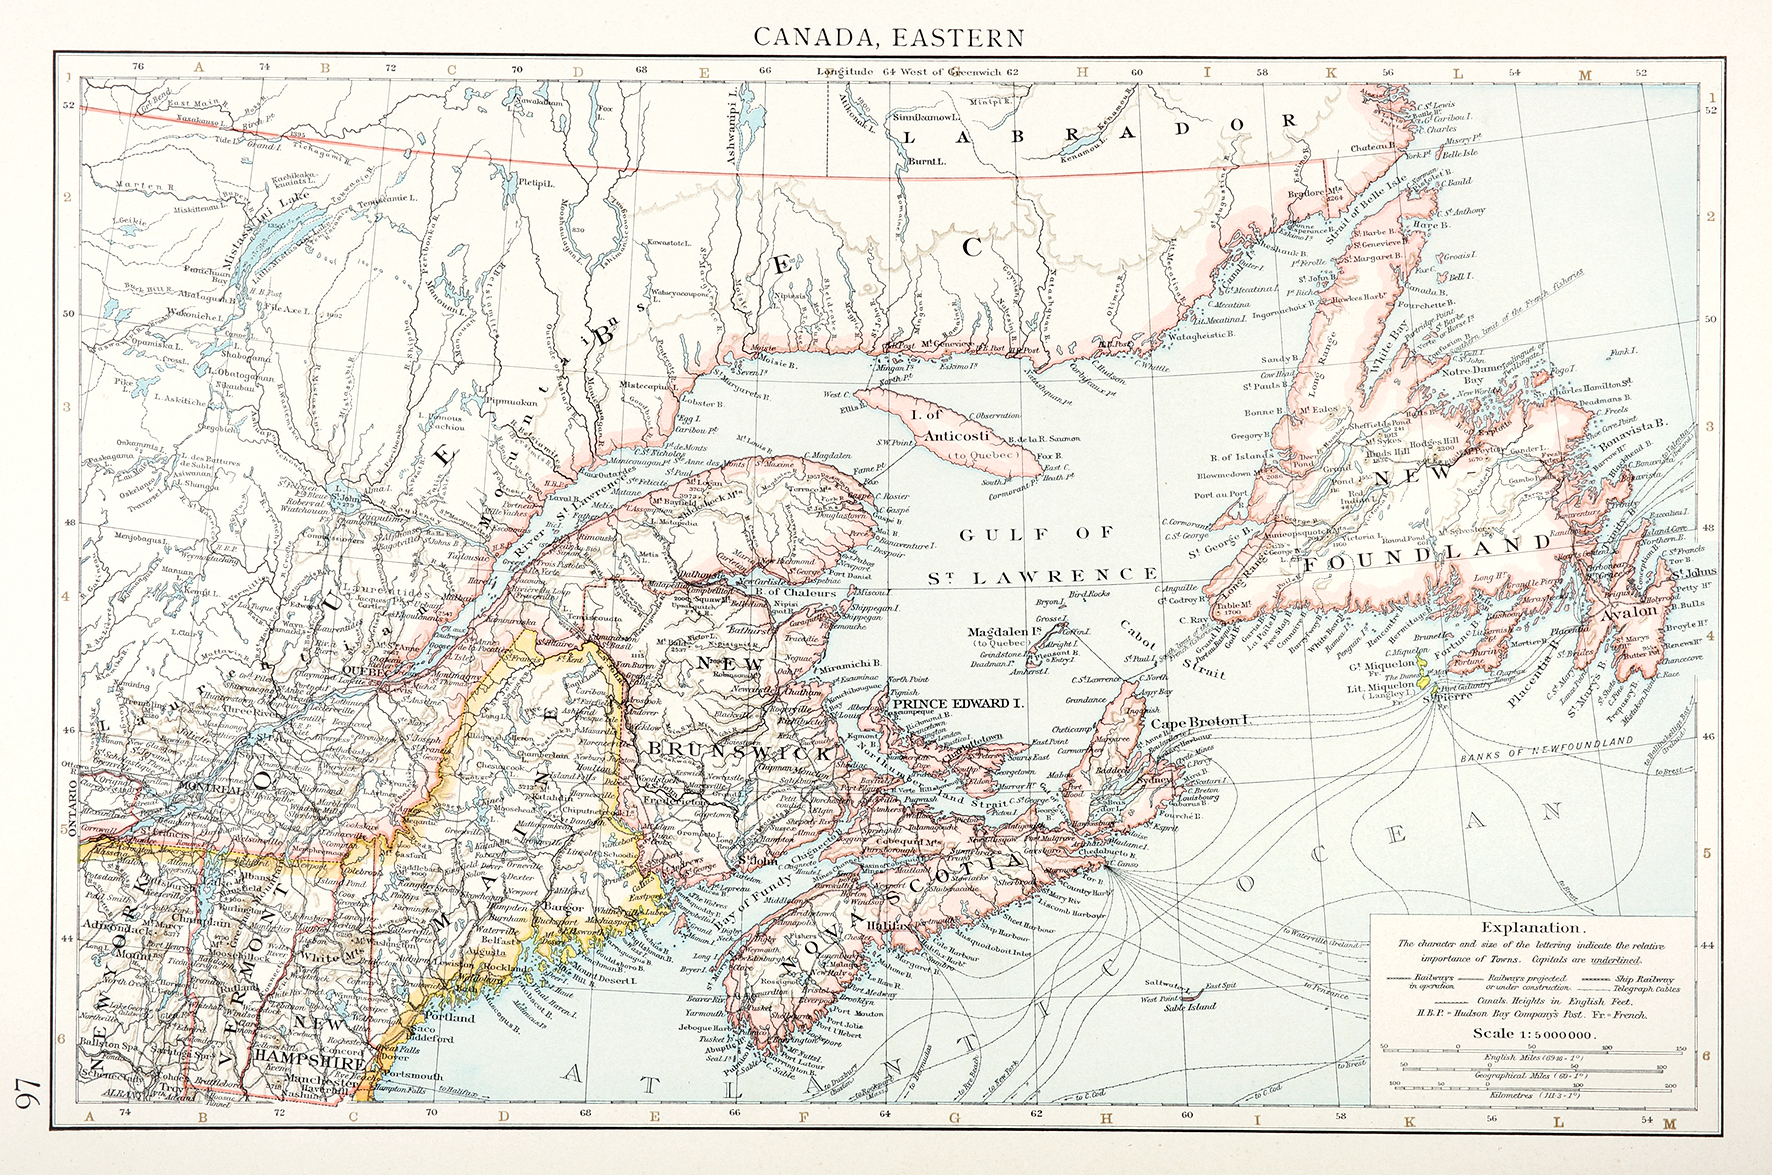 Canada, Eastern - Antique Map from 1901